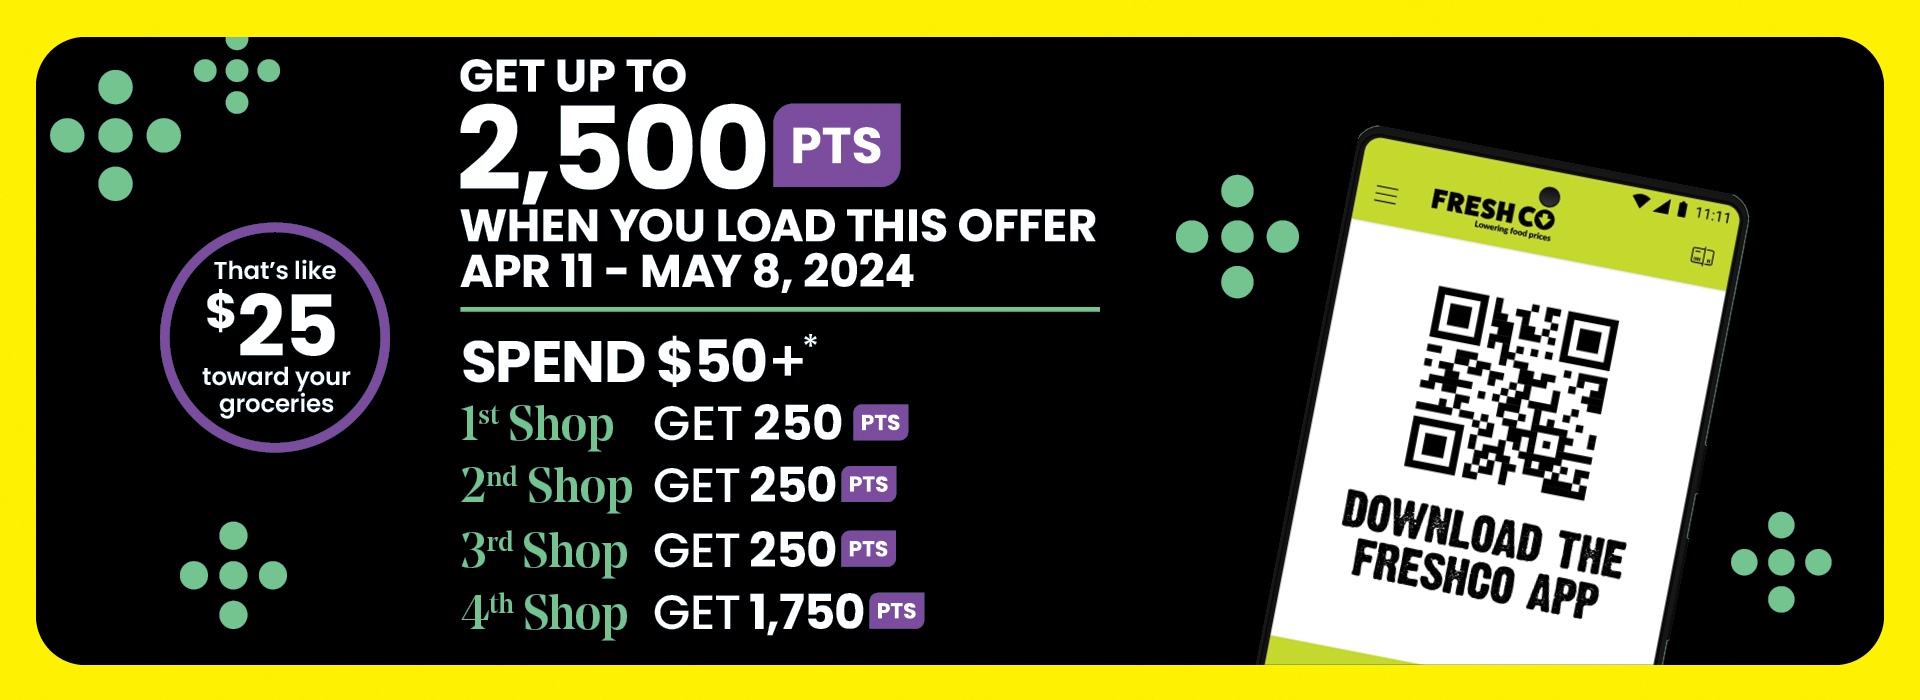 The following image contains the text, "Get up to 2,500 PTS when you load this offer Apr 11-May 8, 2024. Spend $50+*. 1st Shop Get 250 PTS, 2nd Shop Get 250 PTS, 3rd Shop Get 250 PTS, 4th Shop Get 1,750 PTS. That's like $25 toward your groceries."